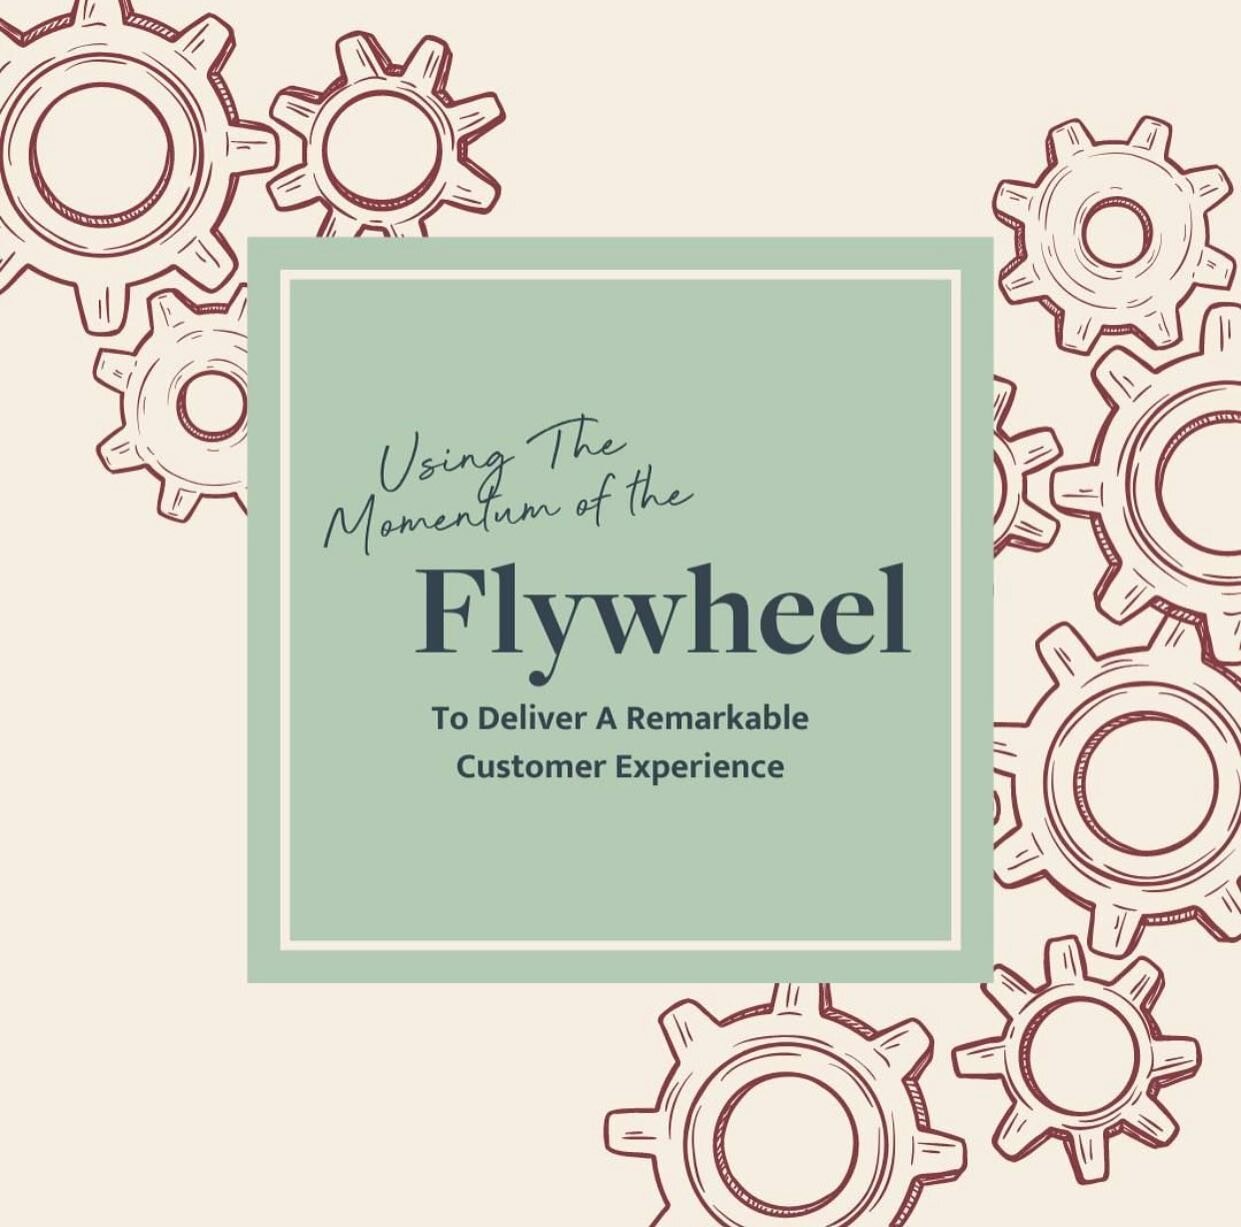 The flywheel model consists of three phases: 

-Attract phase: Earn people's attention not force it
-Engage phase: Focus on relationships
-Delight phase: Help customers reach their goals

As @hubspot describes it &quot;With the flywheel, you use the 